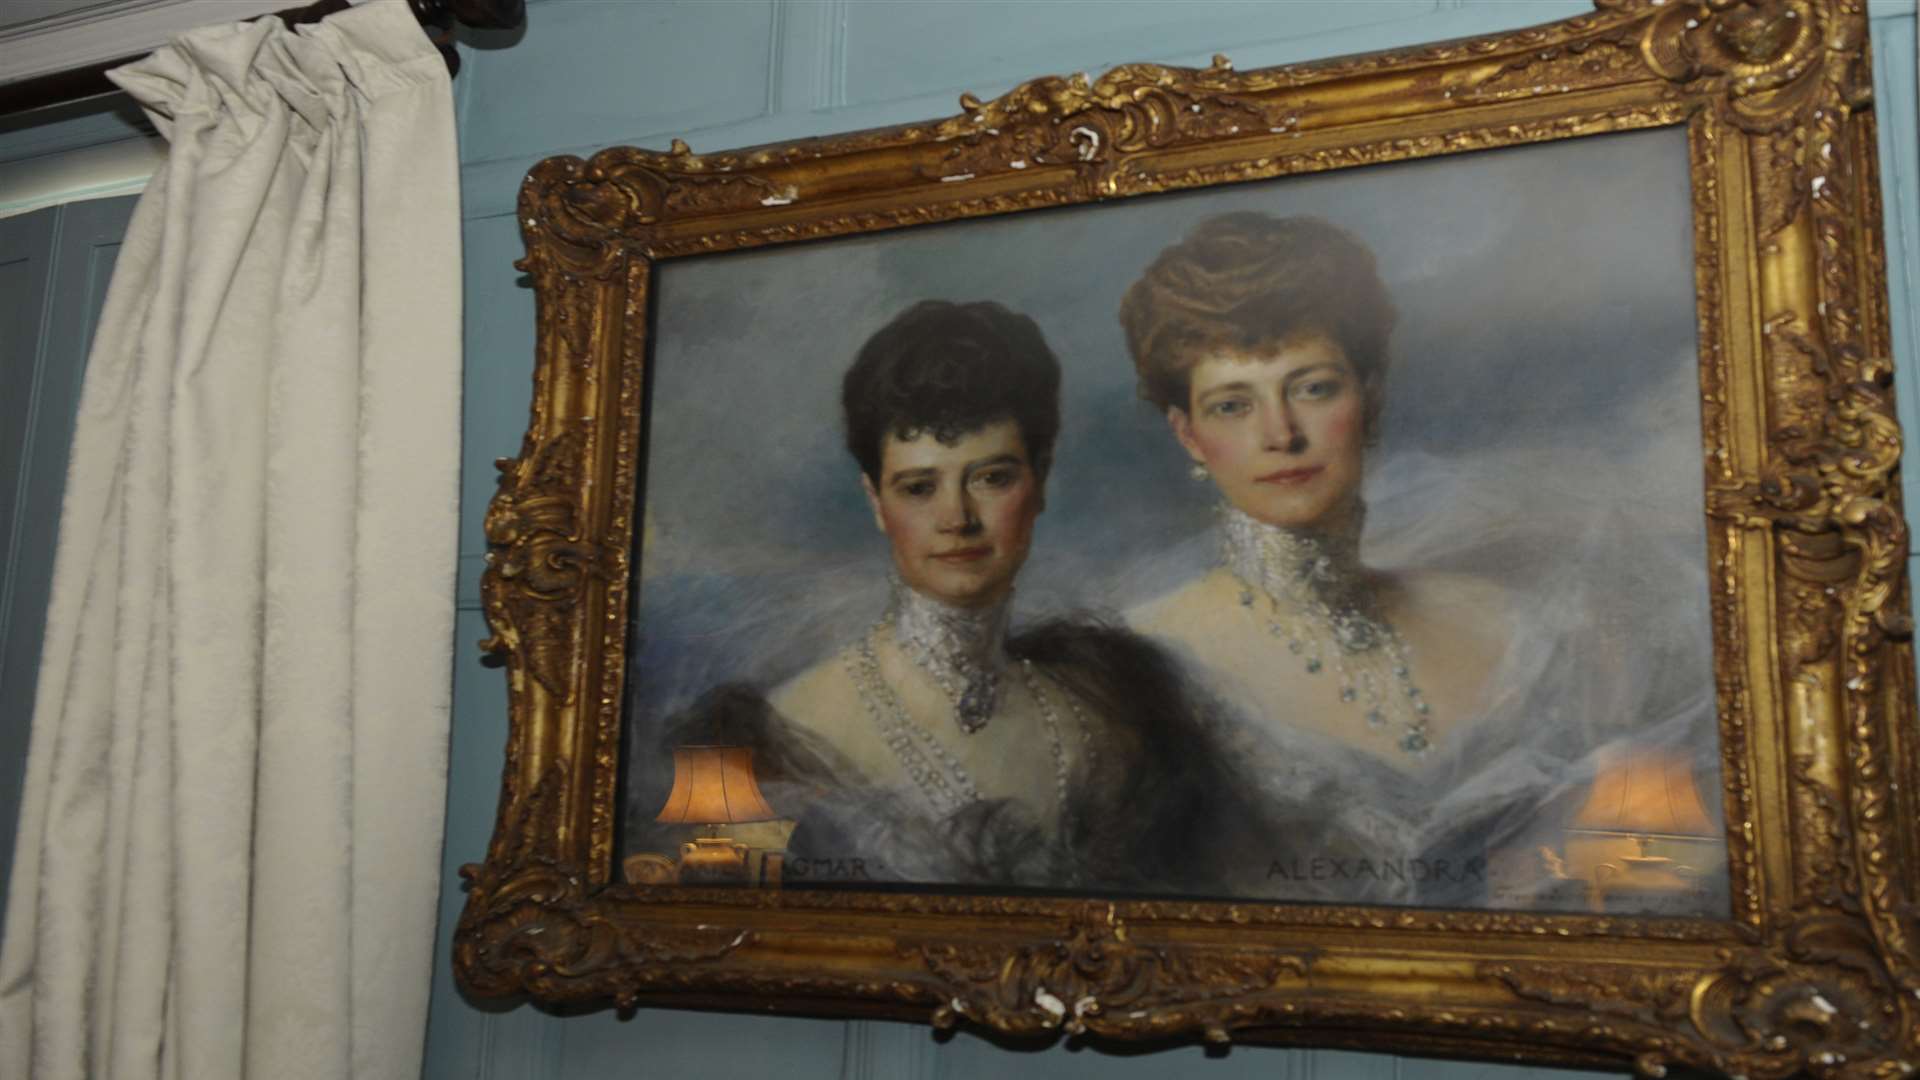 Princess Olga's family history is marred by tragedy